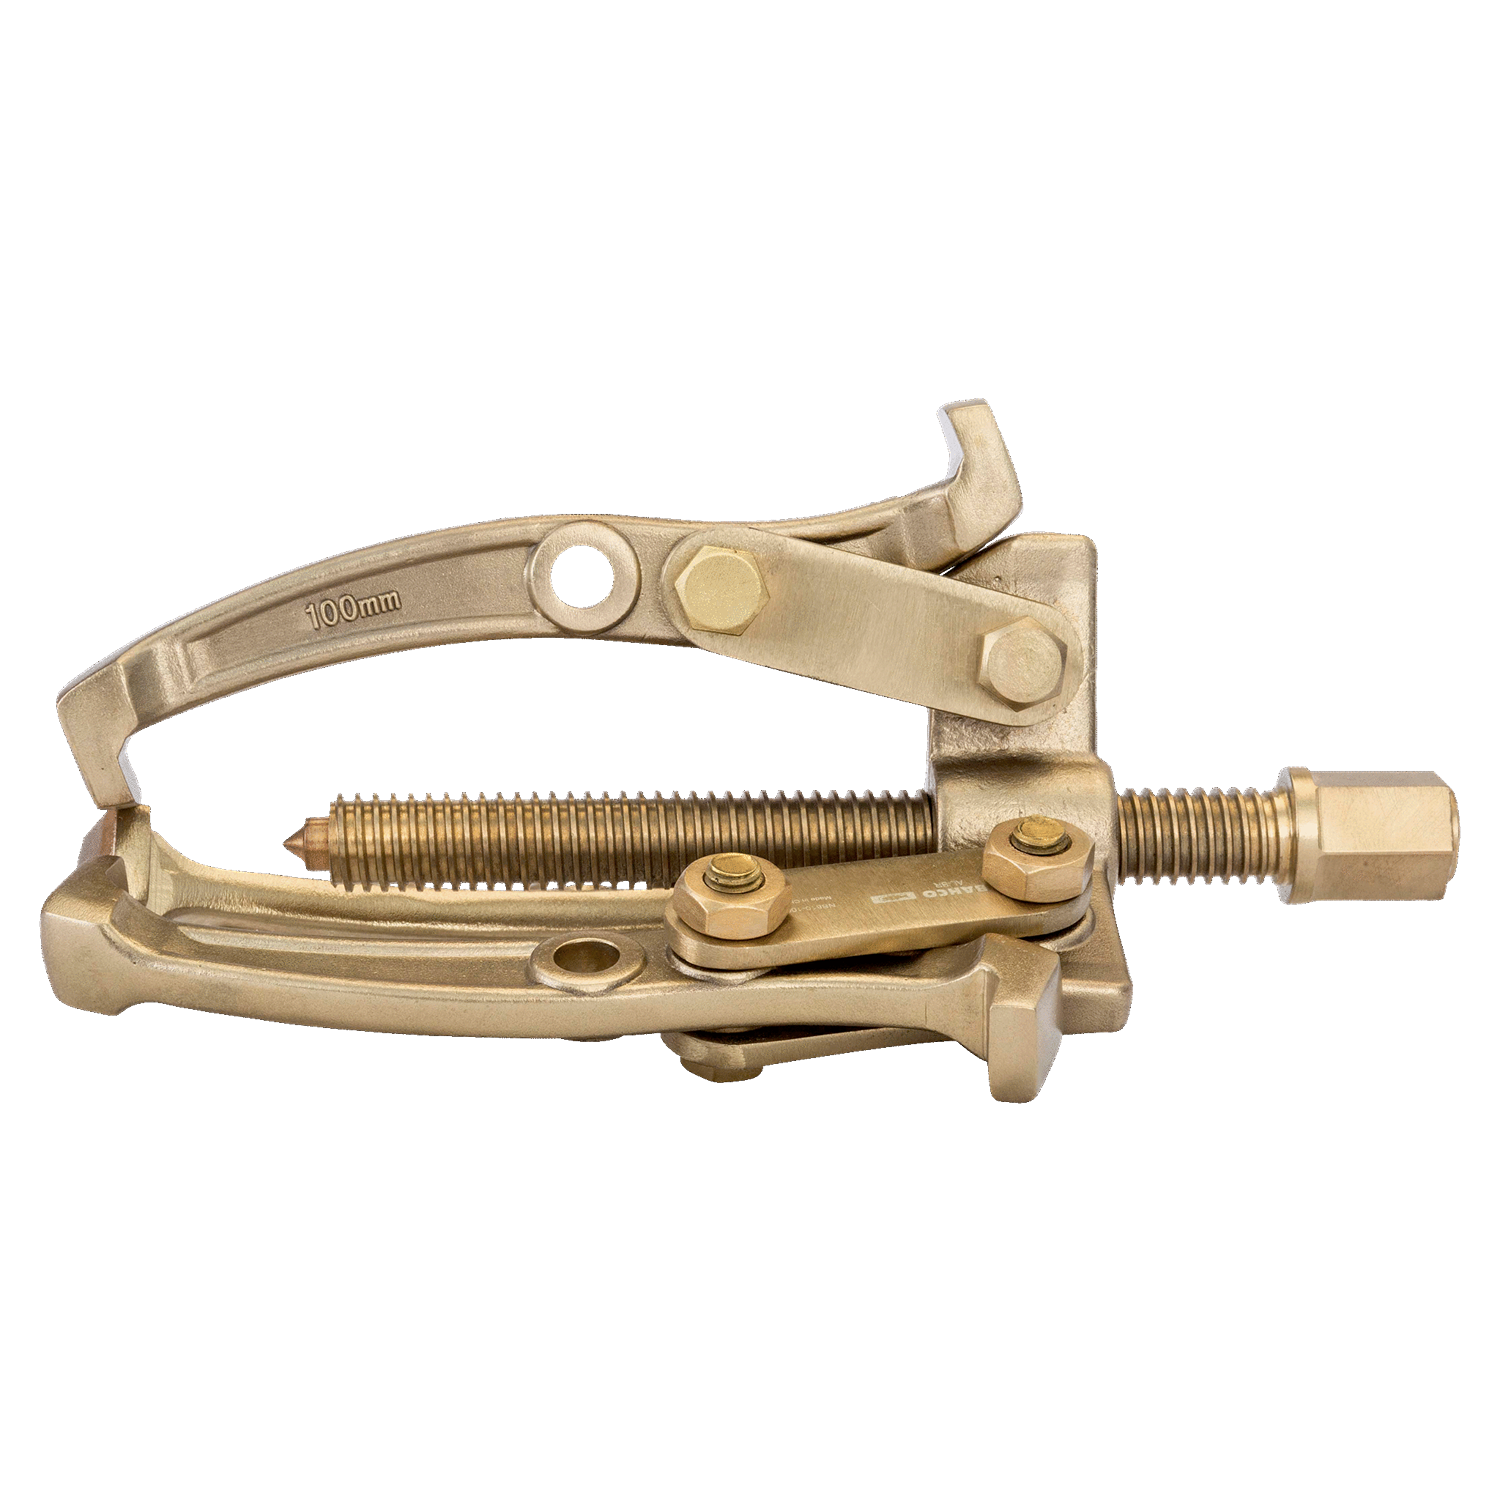 BAHCO NS810 Non-Sparking 3-Jaws Reversible Puller Aluminium - Premium Reversible Puller from BAHCO - Shop now at Yew Aik.